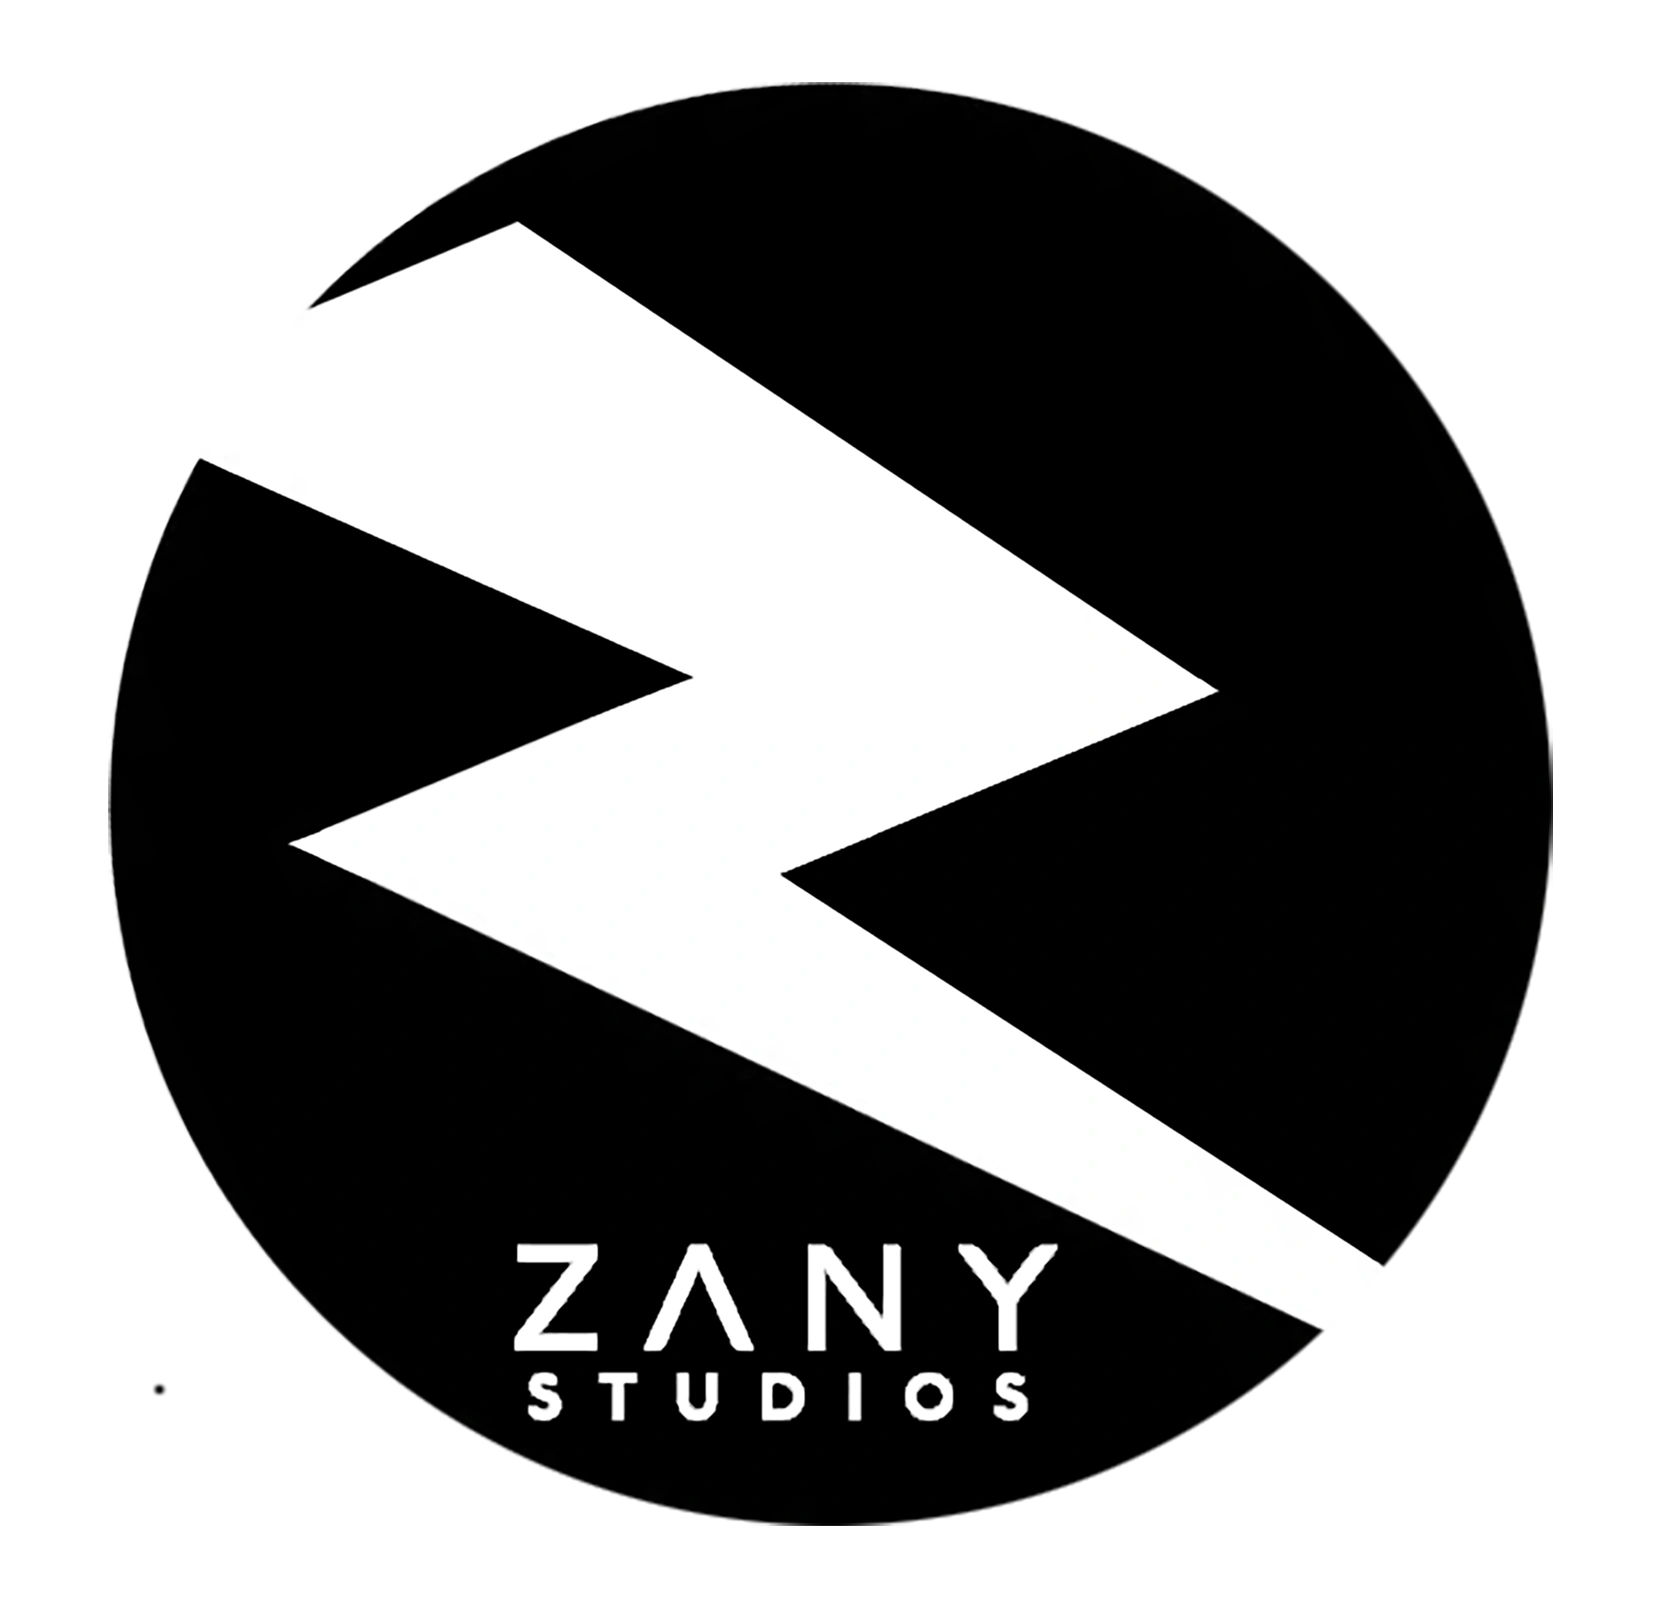 Zany Studios representing creatives in traditional canvas work sculptures, and crypto NFT arts